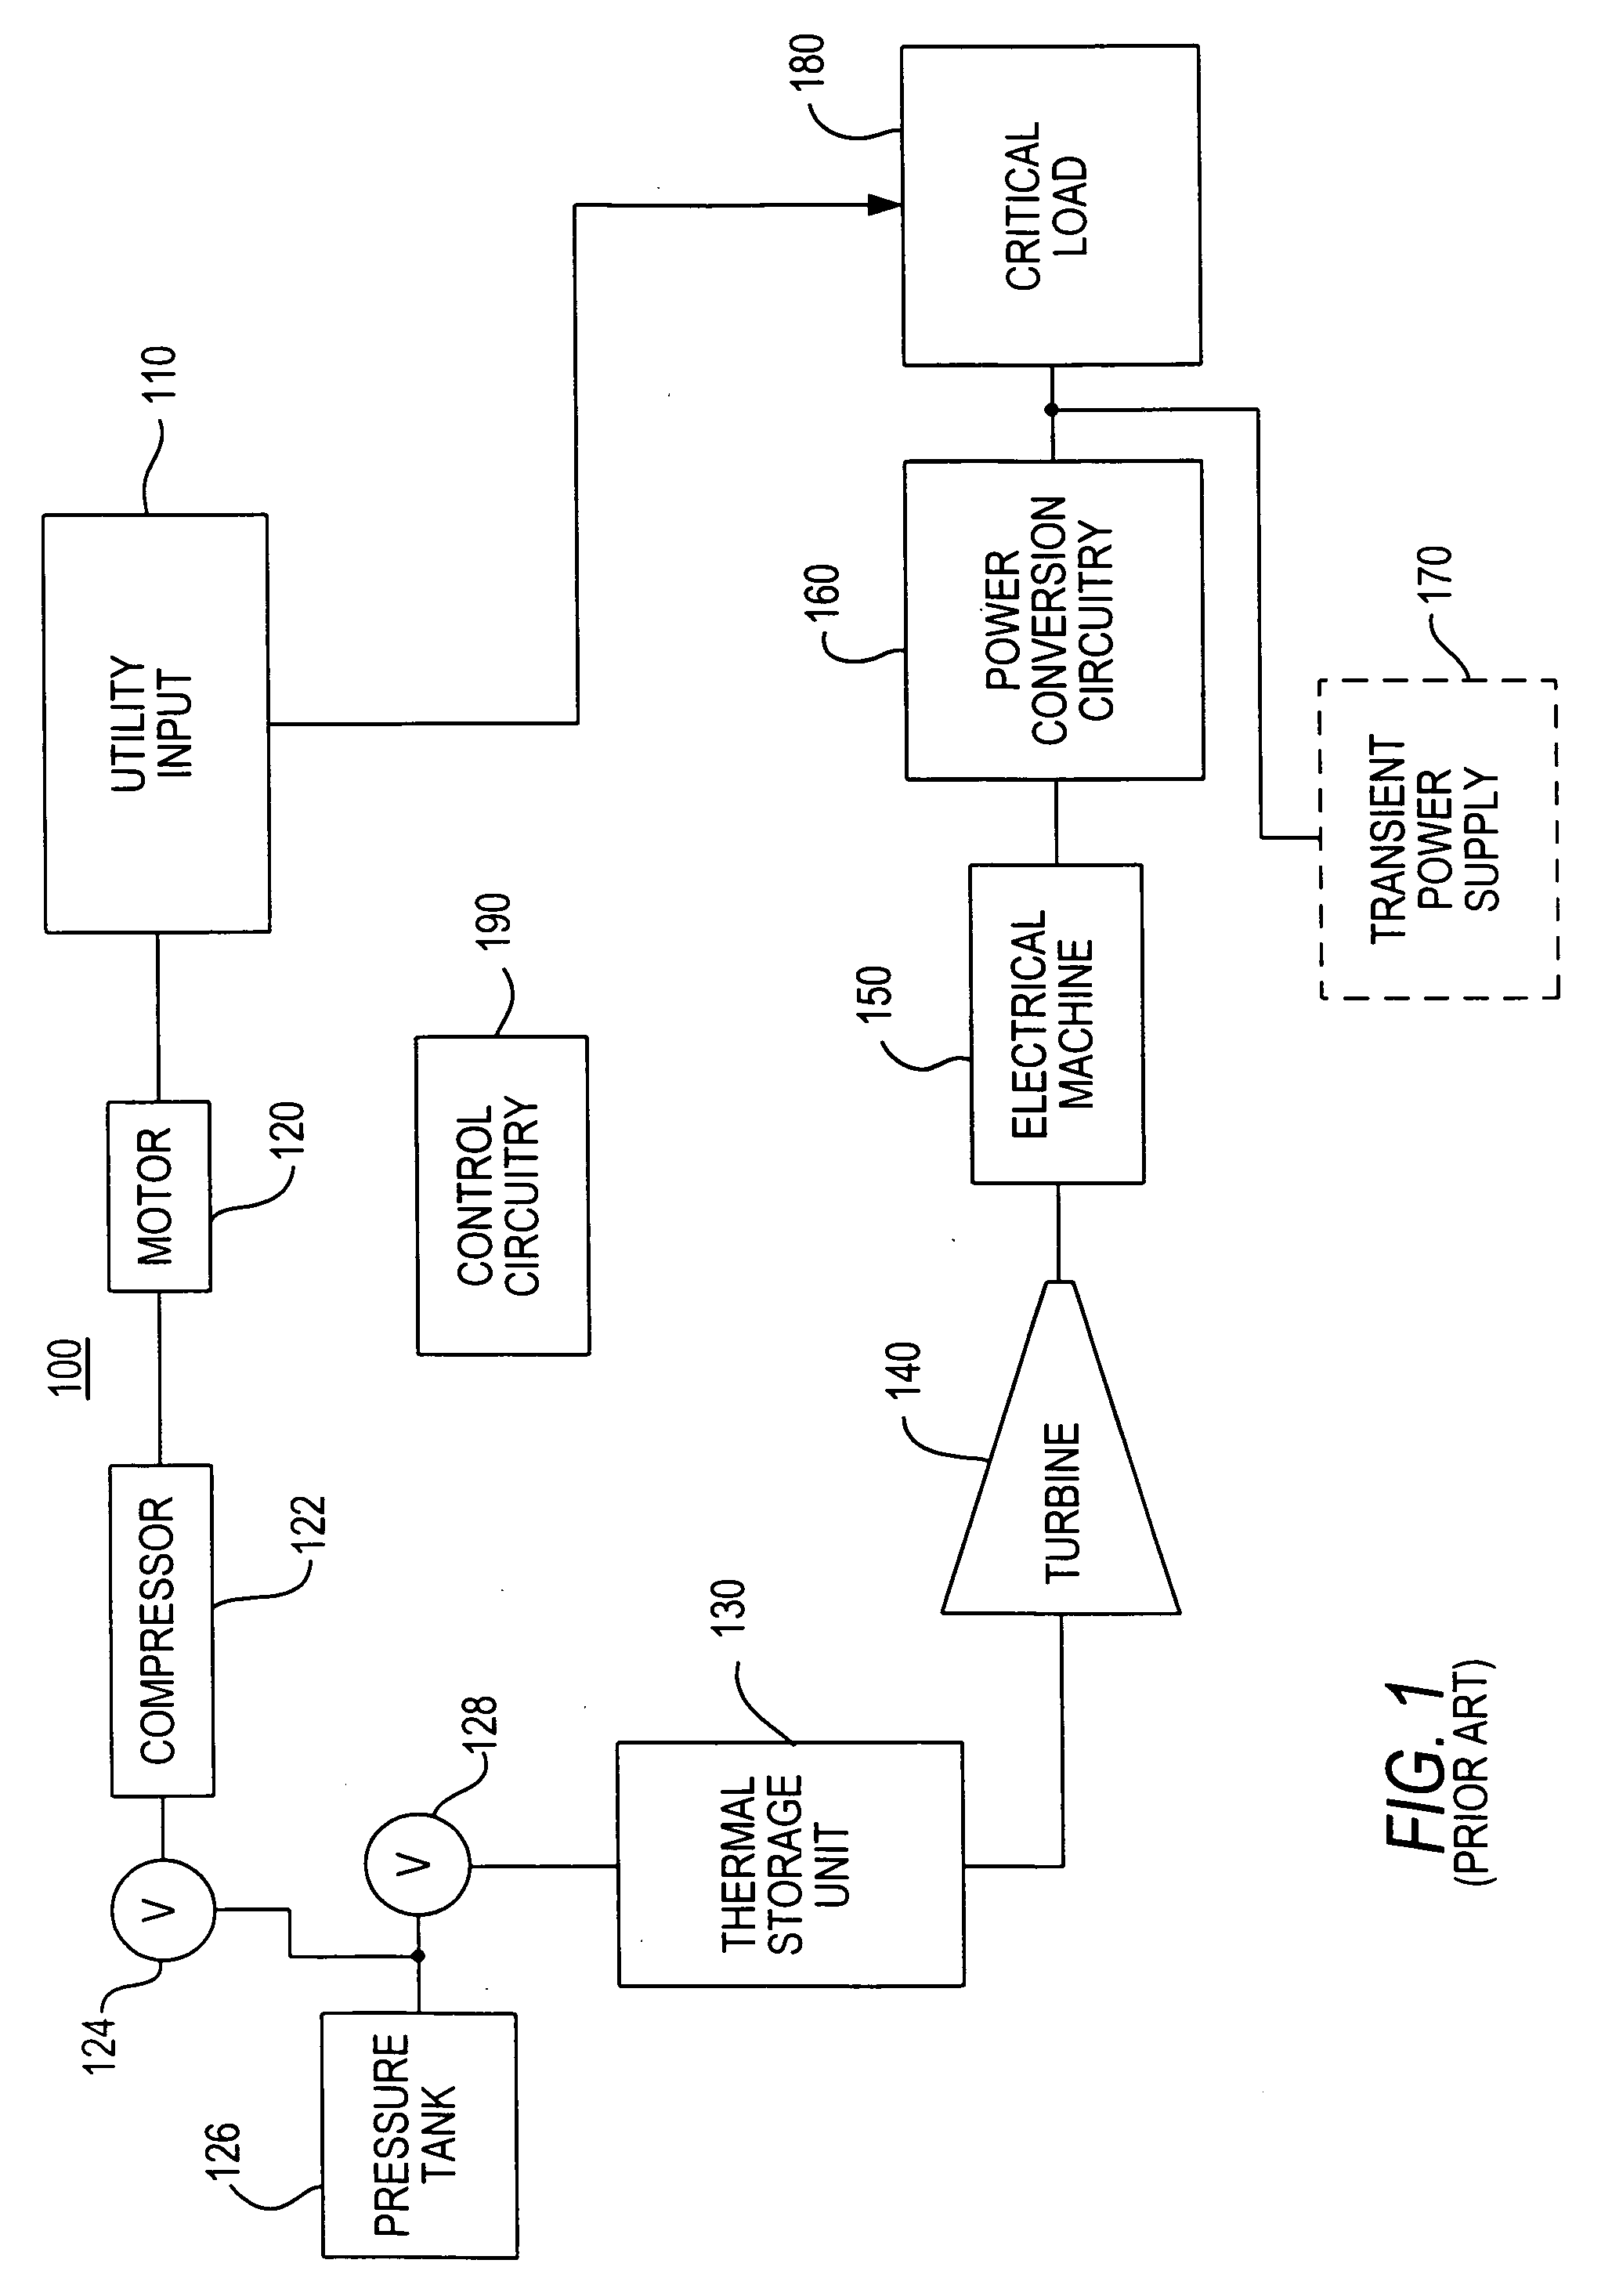 Systems and methods for providing cooling in compressed air storage power supply systems